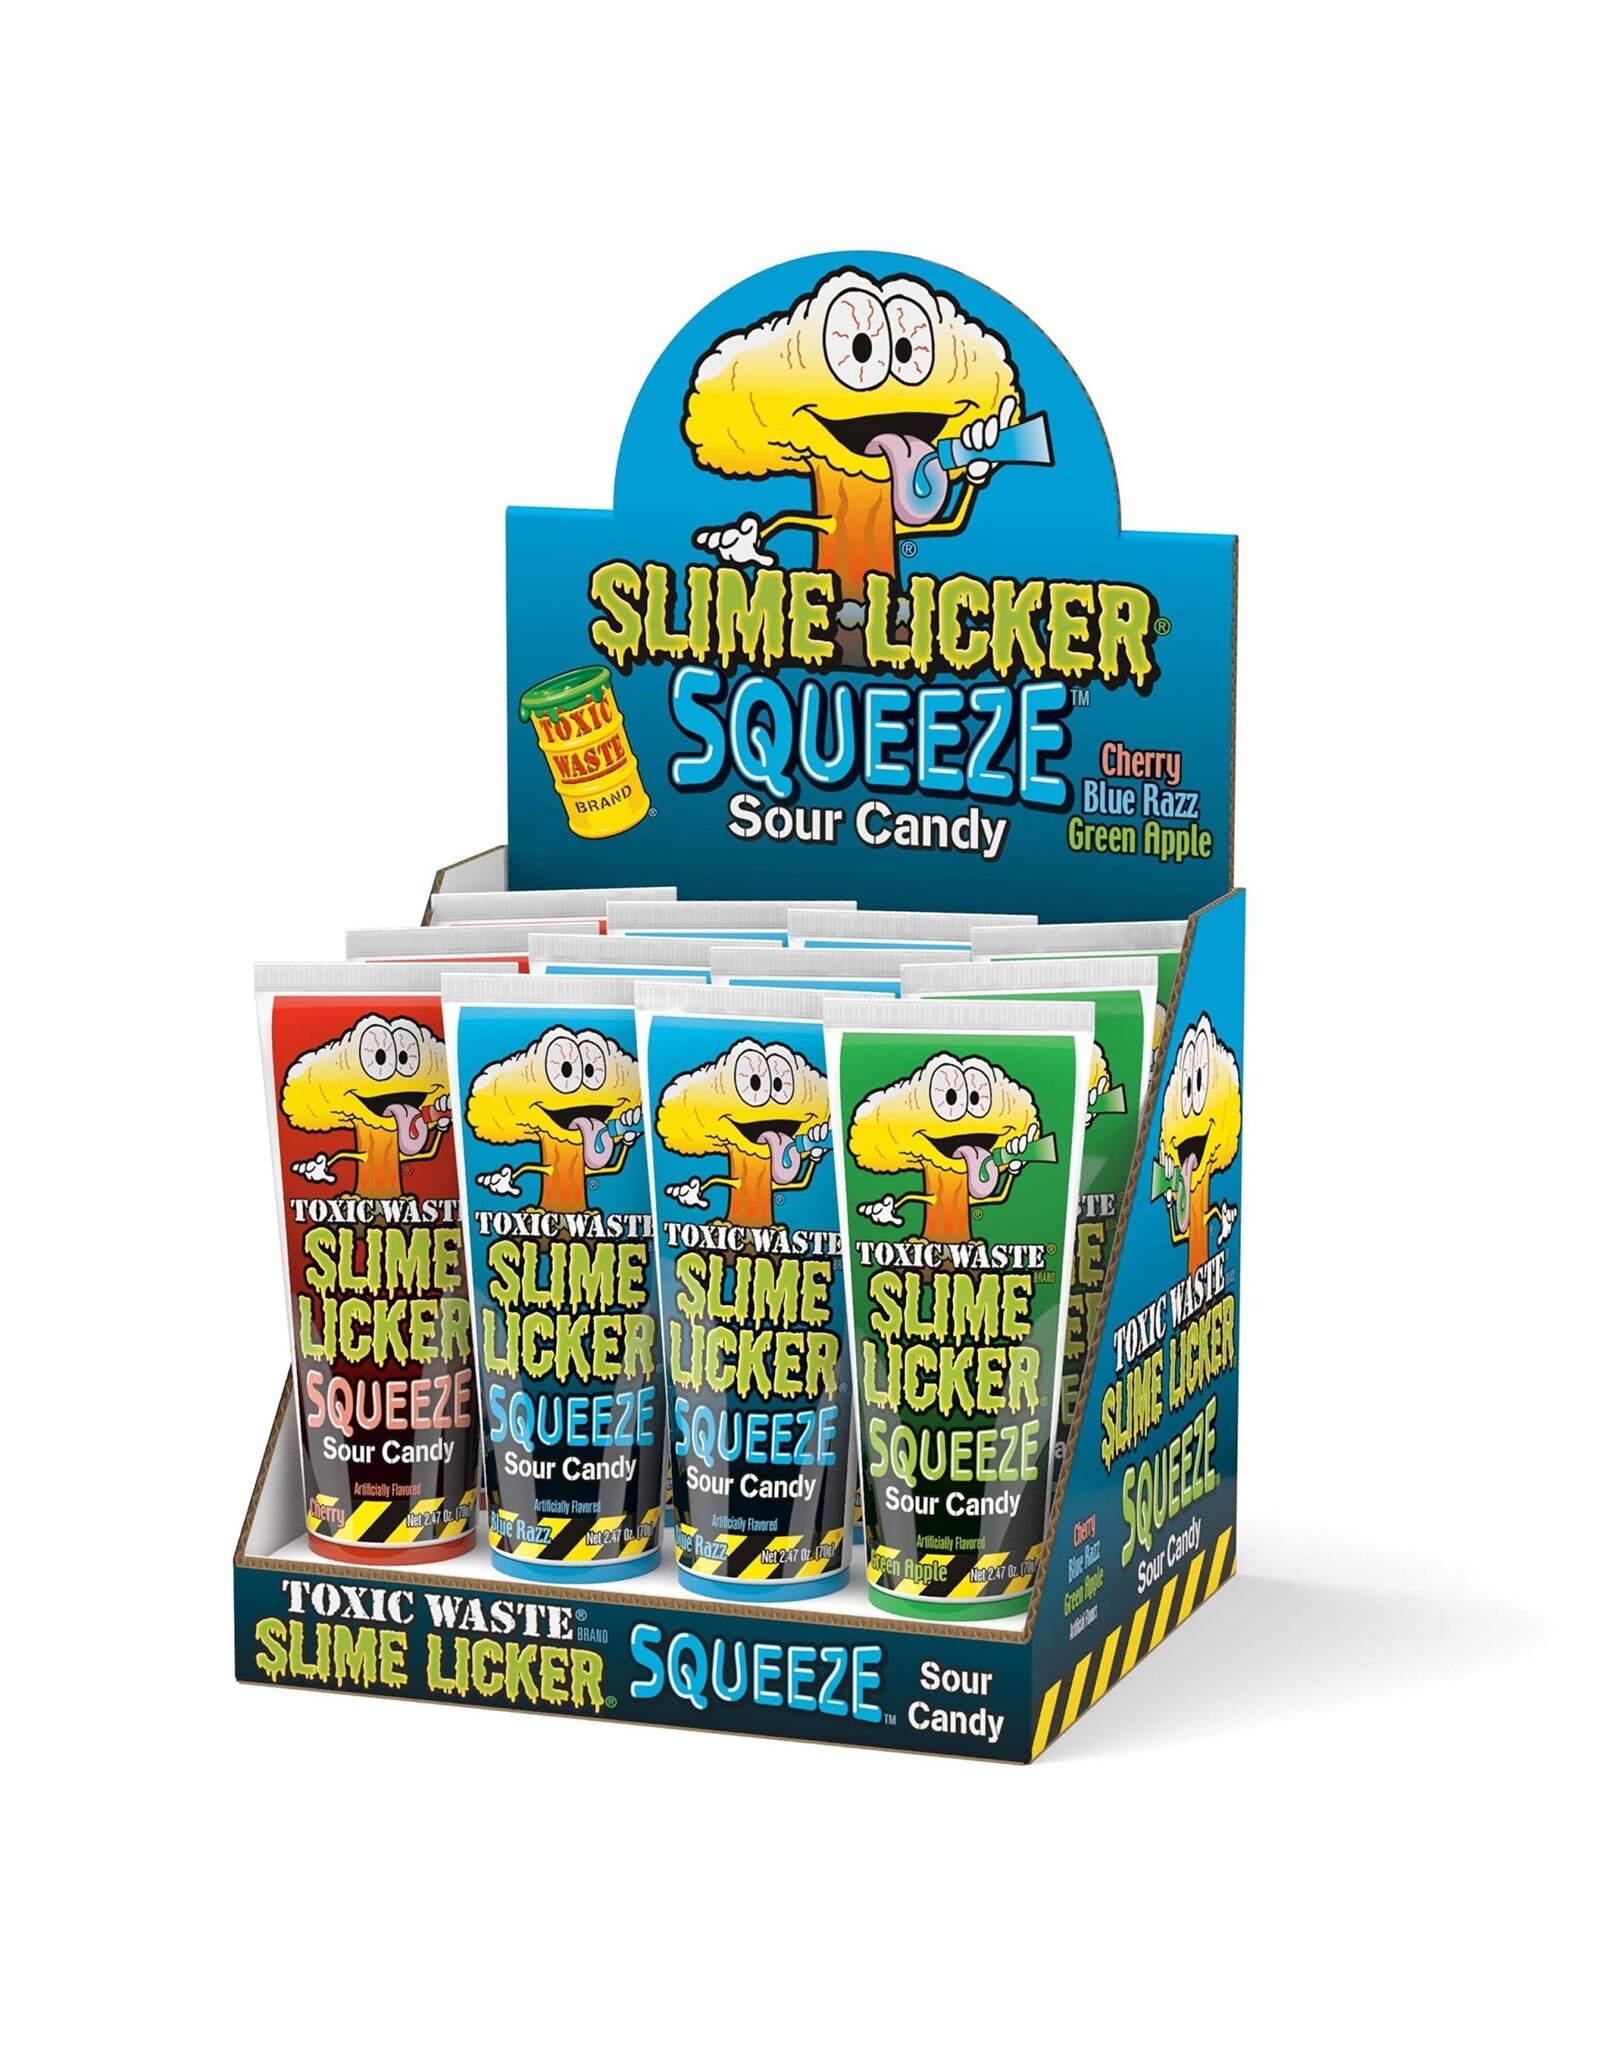 Toxic Waste - Slime Licker Sour Squeeze Candy - 70g (Blue Razz, Cherry & Apple Flavor)